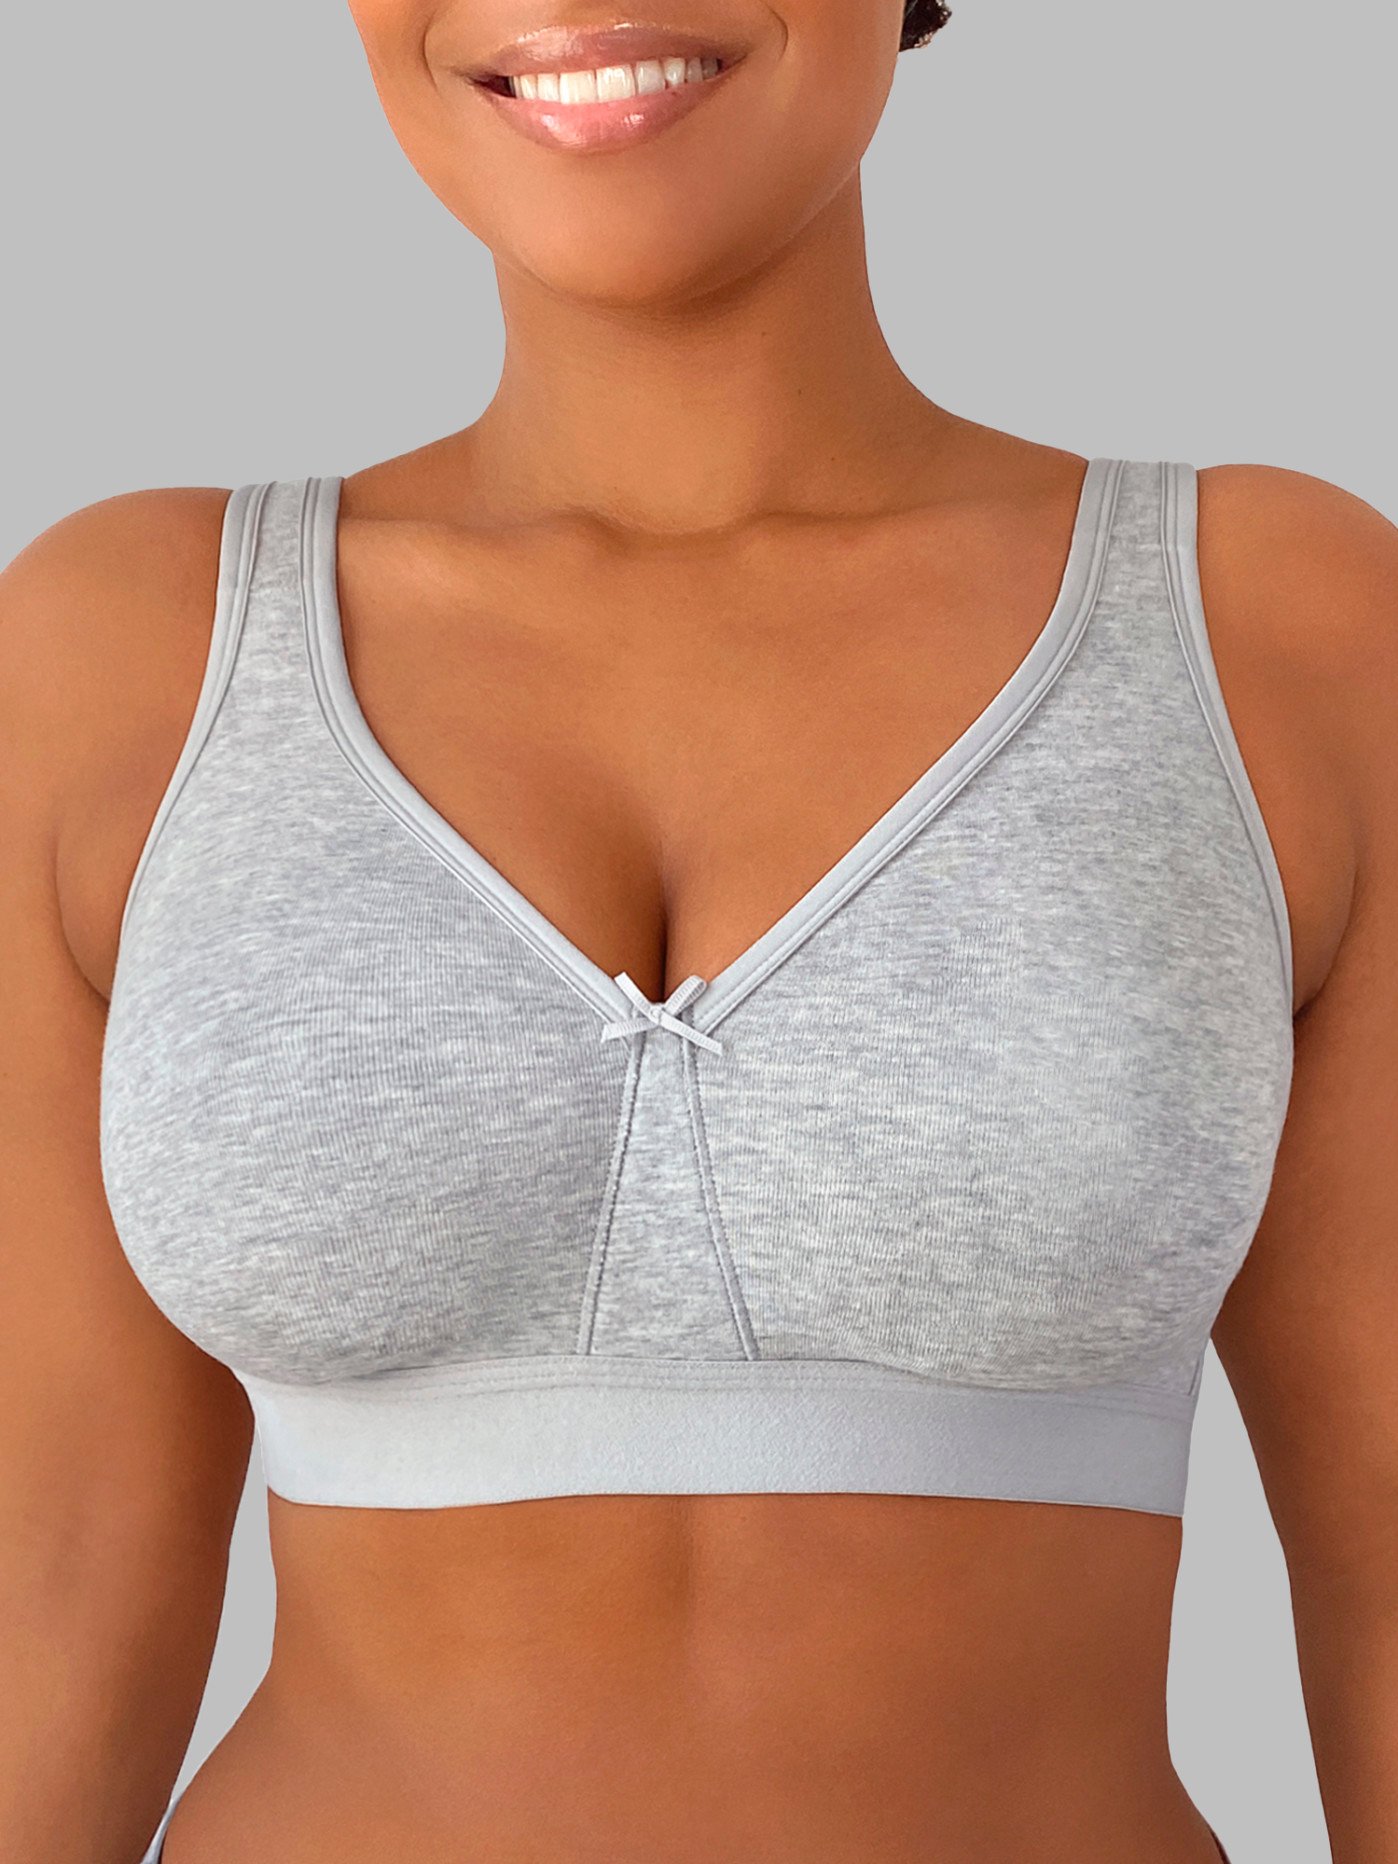 Cotton On Body The Body Seamless Wirefree Bra 2024, Buy Cotton On Body  Online